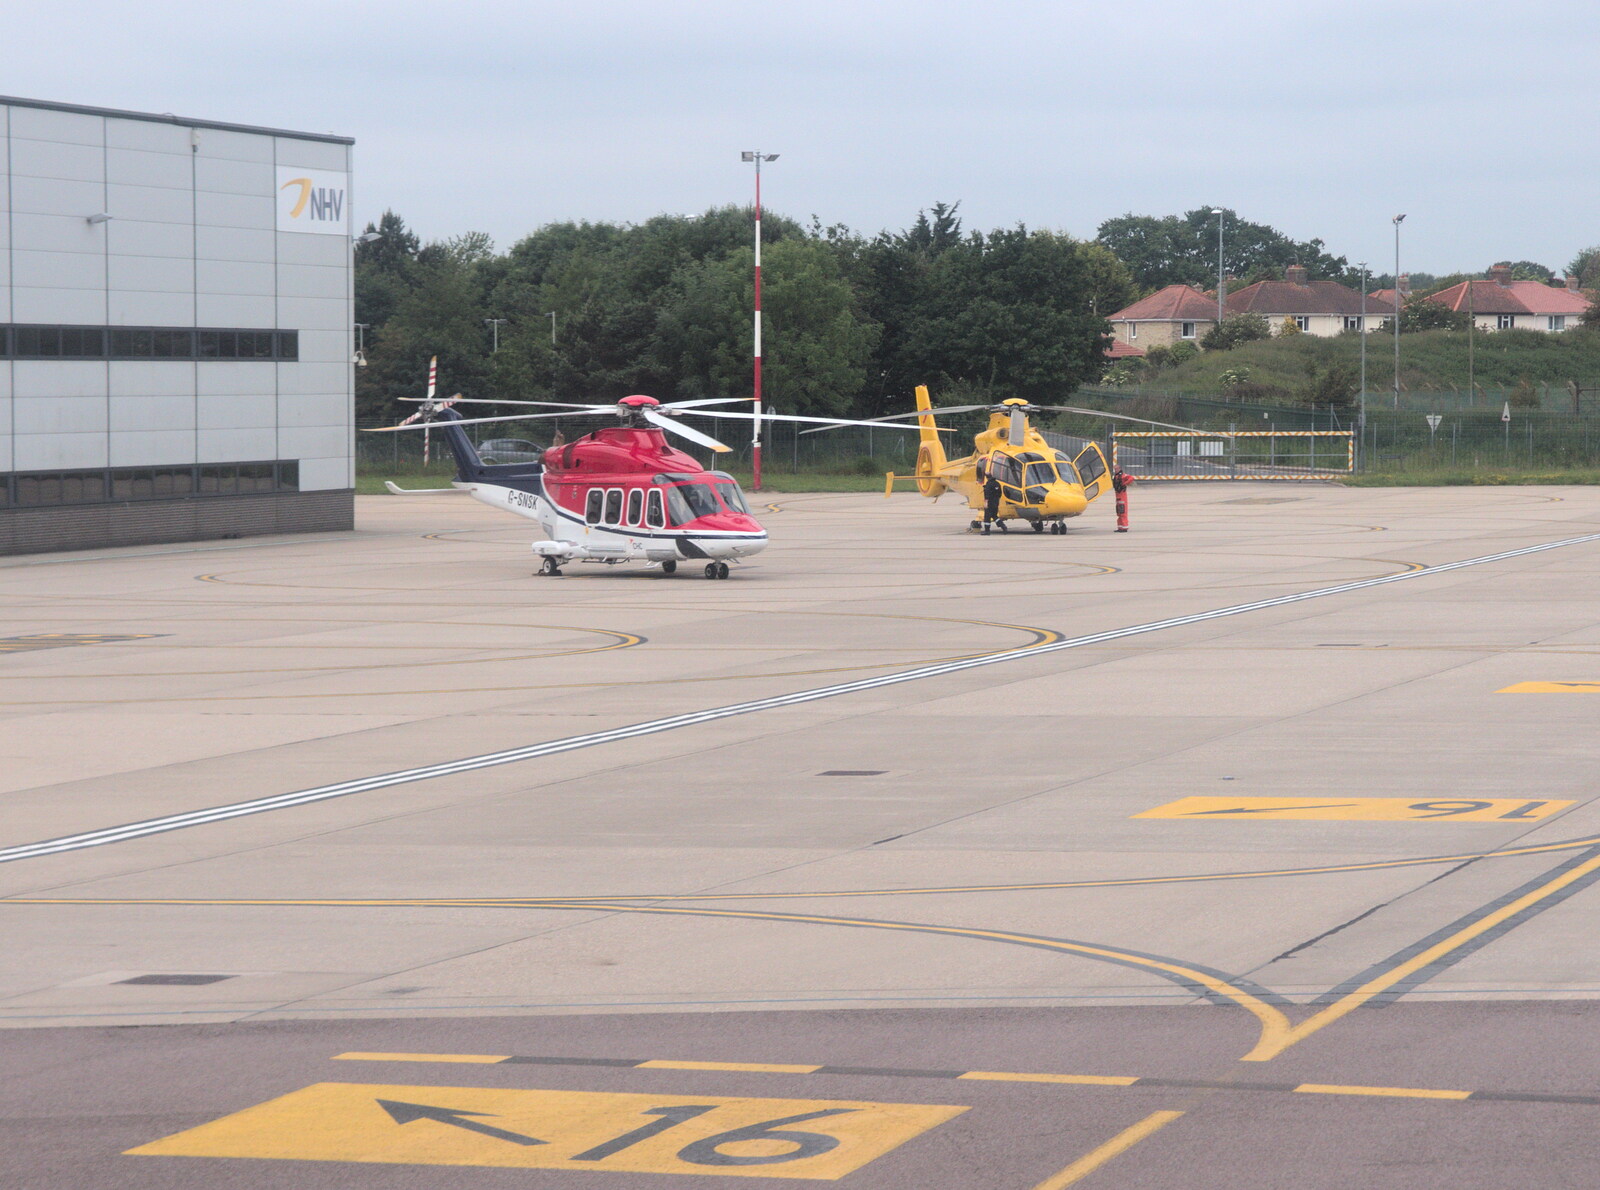 The East Anglian Air Ambulance in on the ground from A Postcard From Asperen, Gelderland, Netherlands - 9th June 2018